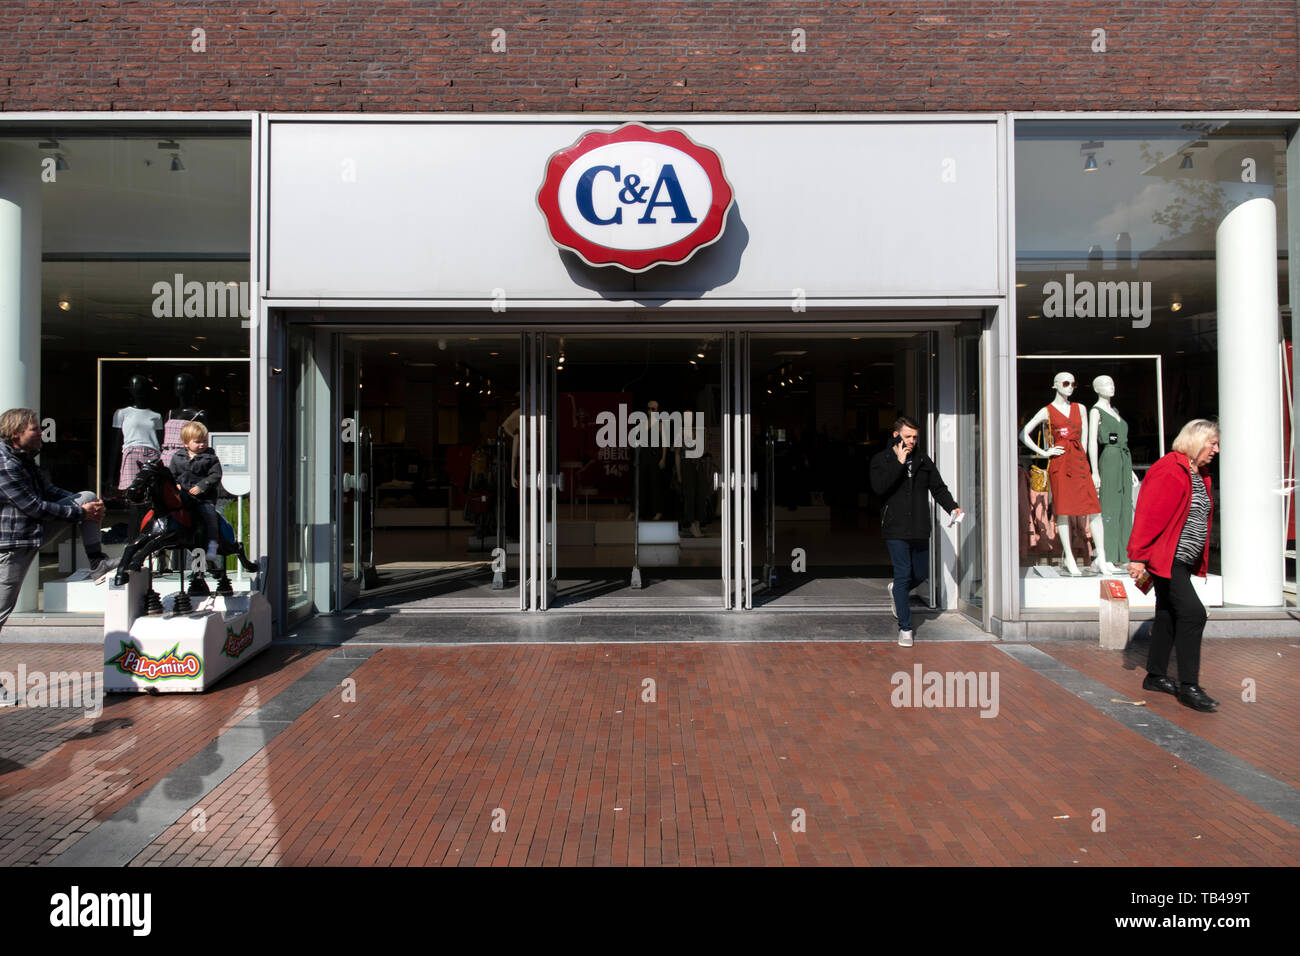 C&A Shop At Amstelveen The Netherlands 2019 Stock Photo - Alamy